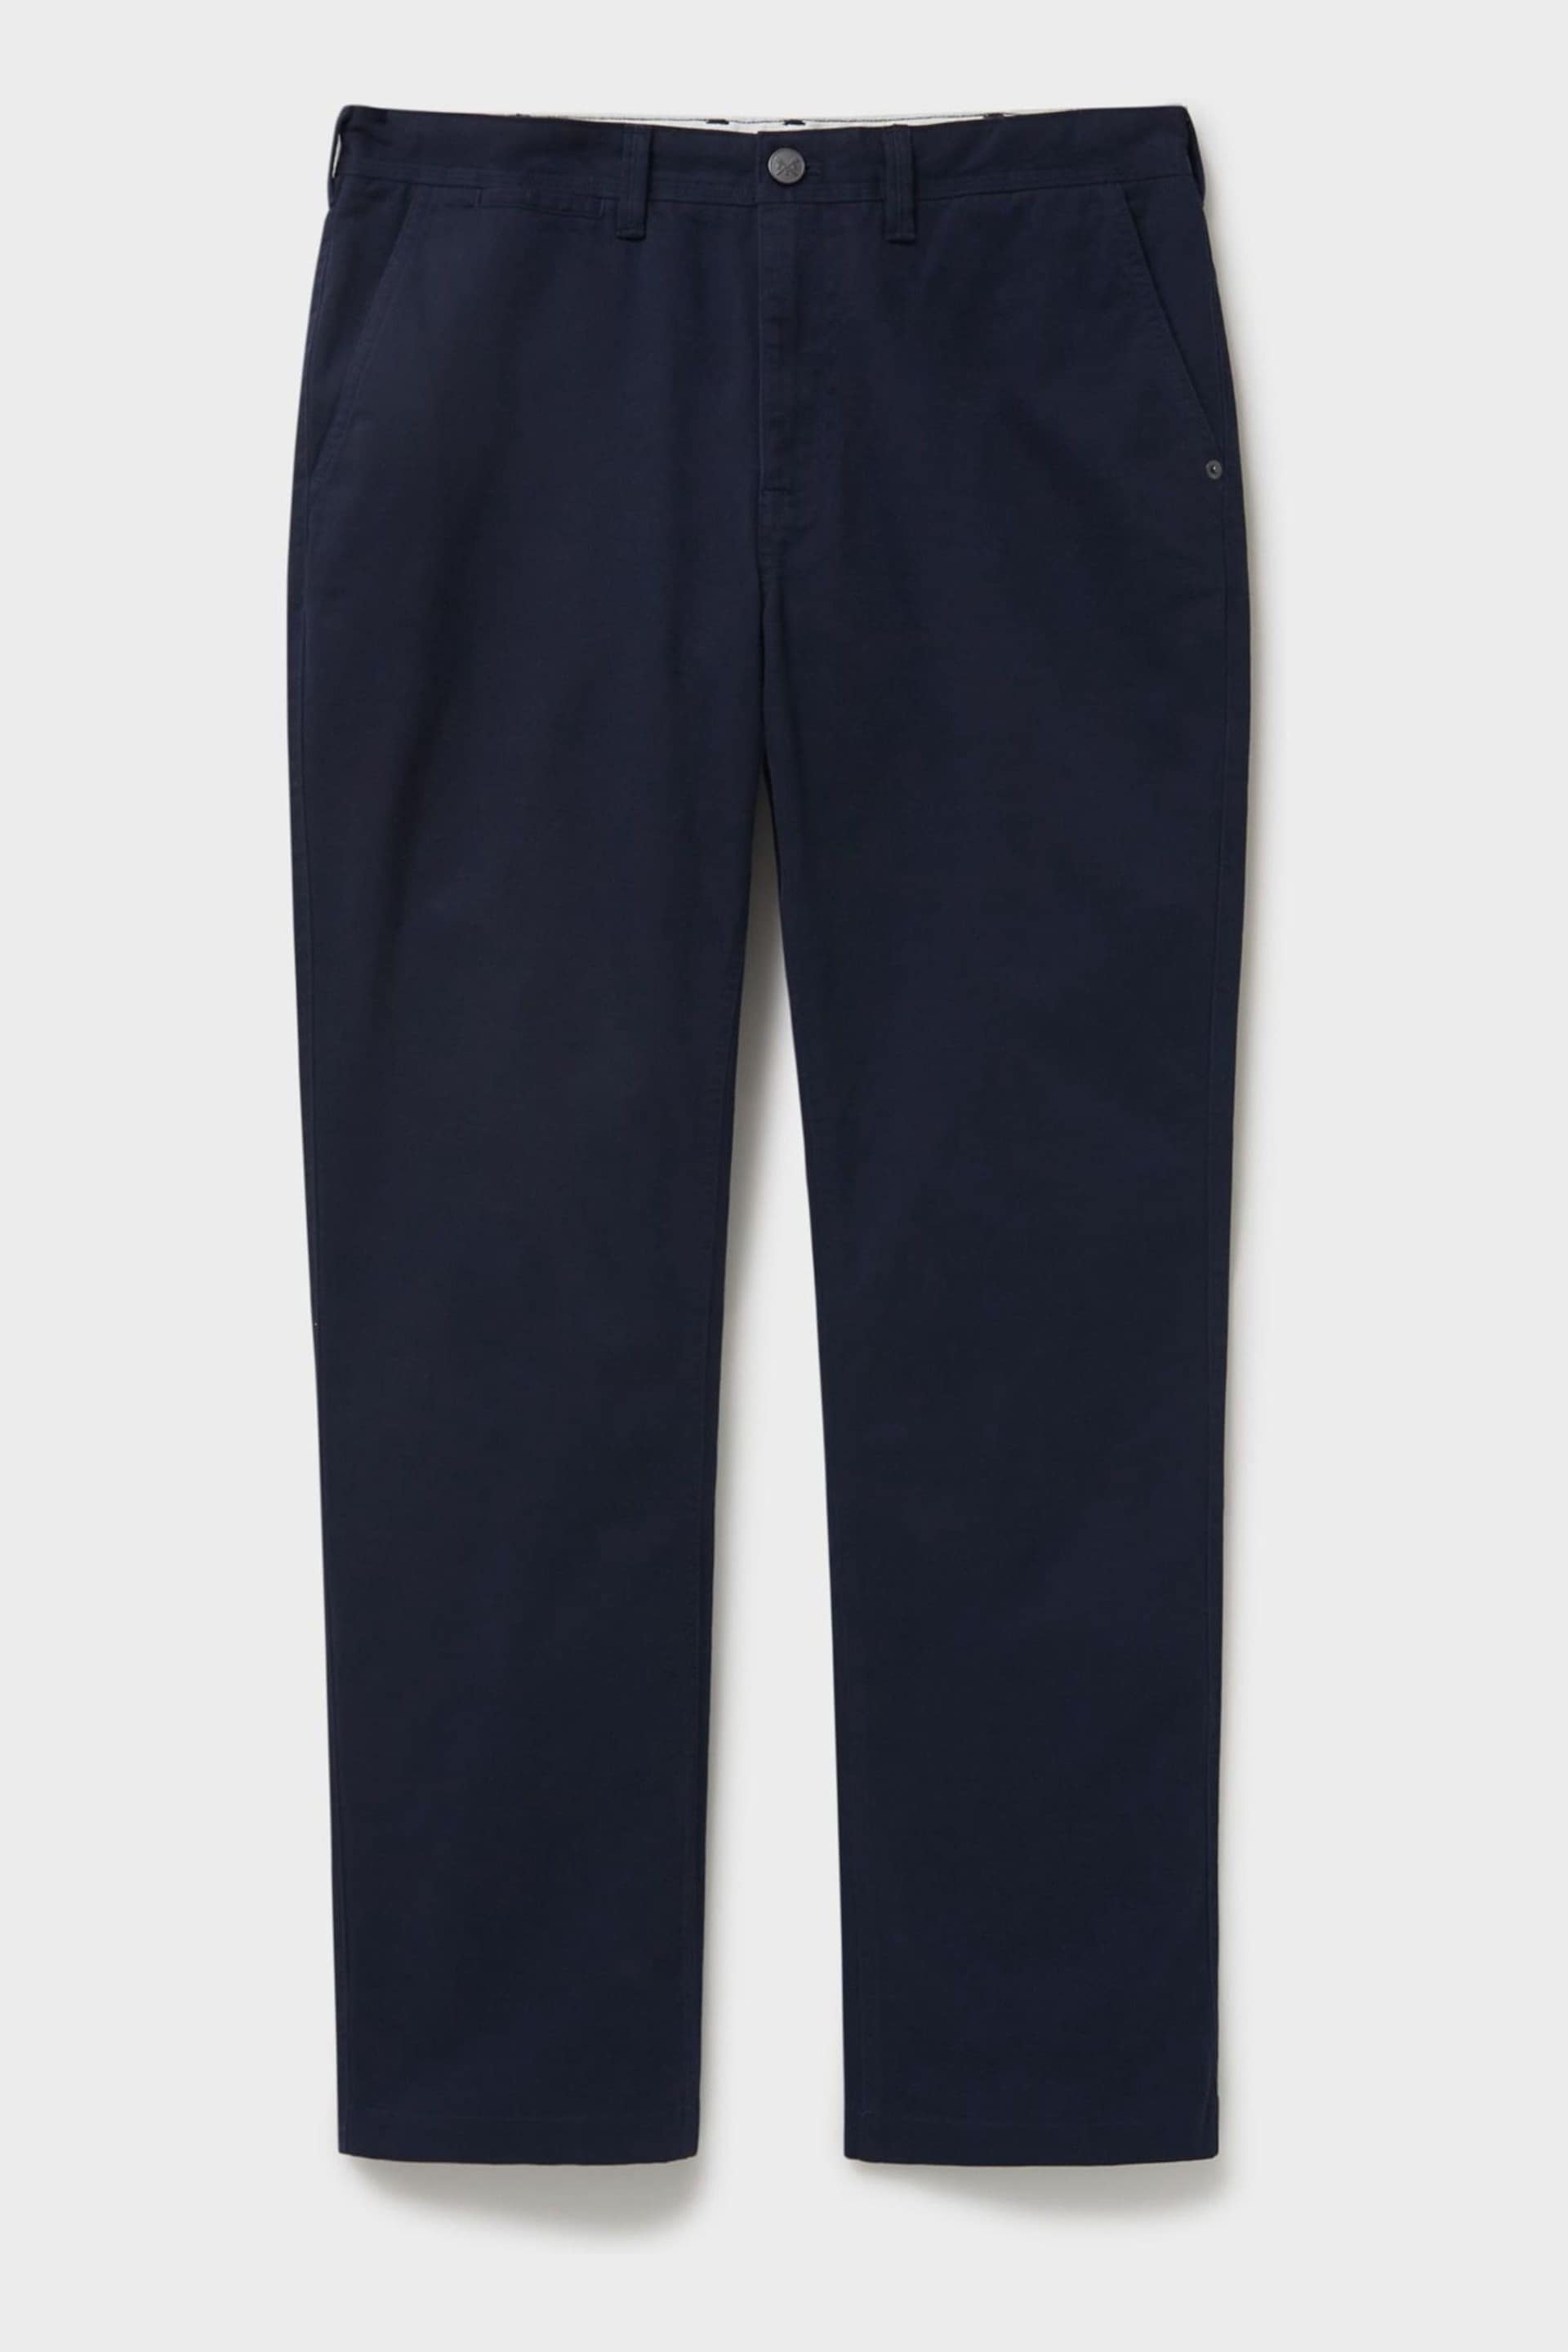 Crew Clothing Cotton Vintage Chinos - Image 4 of 4